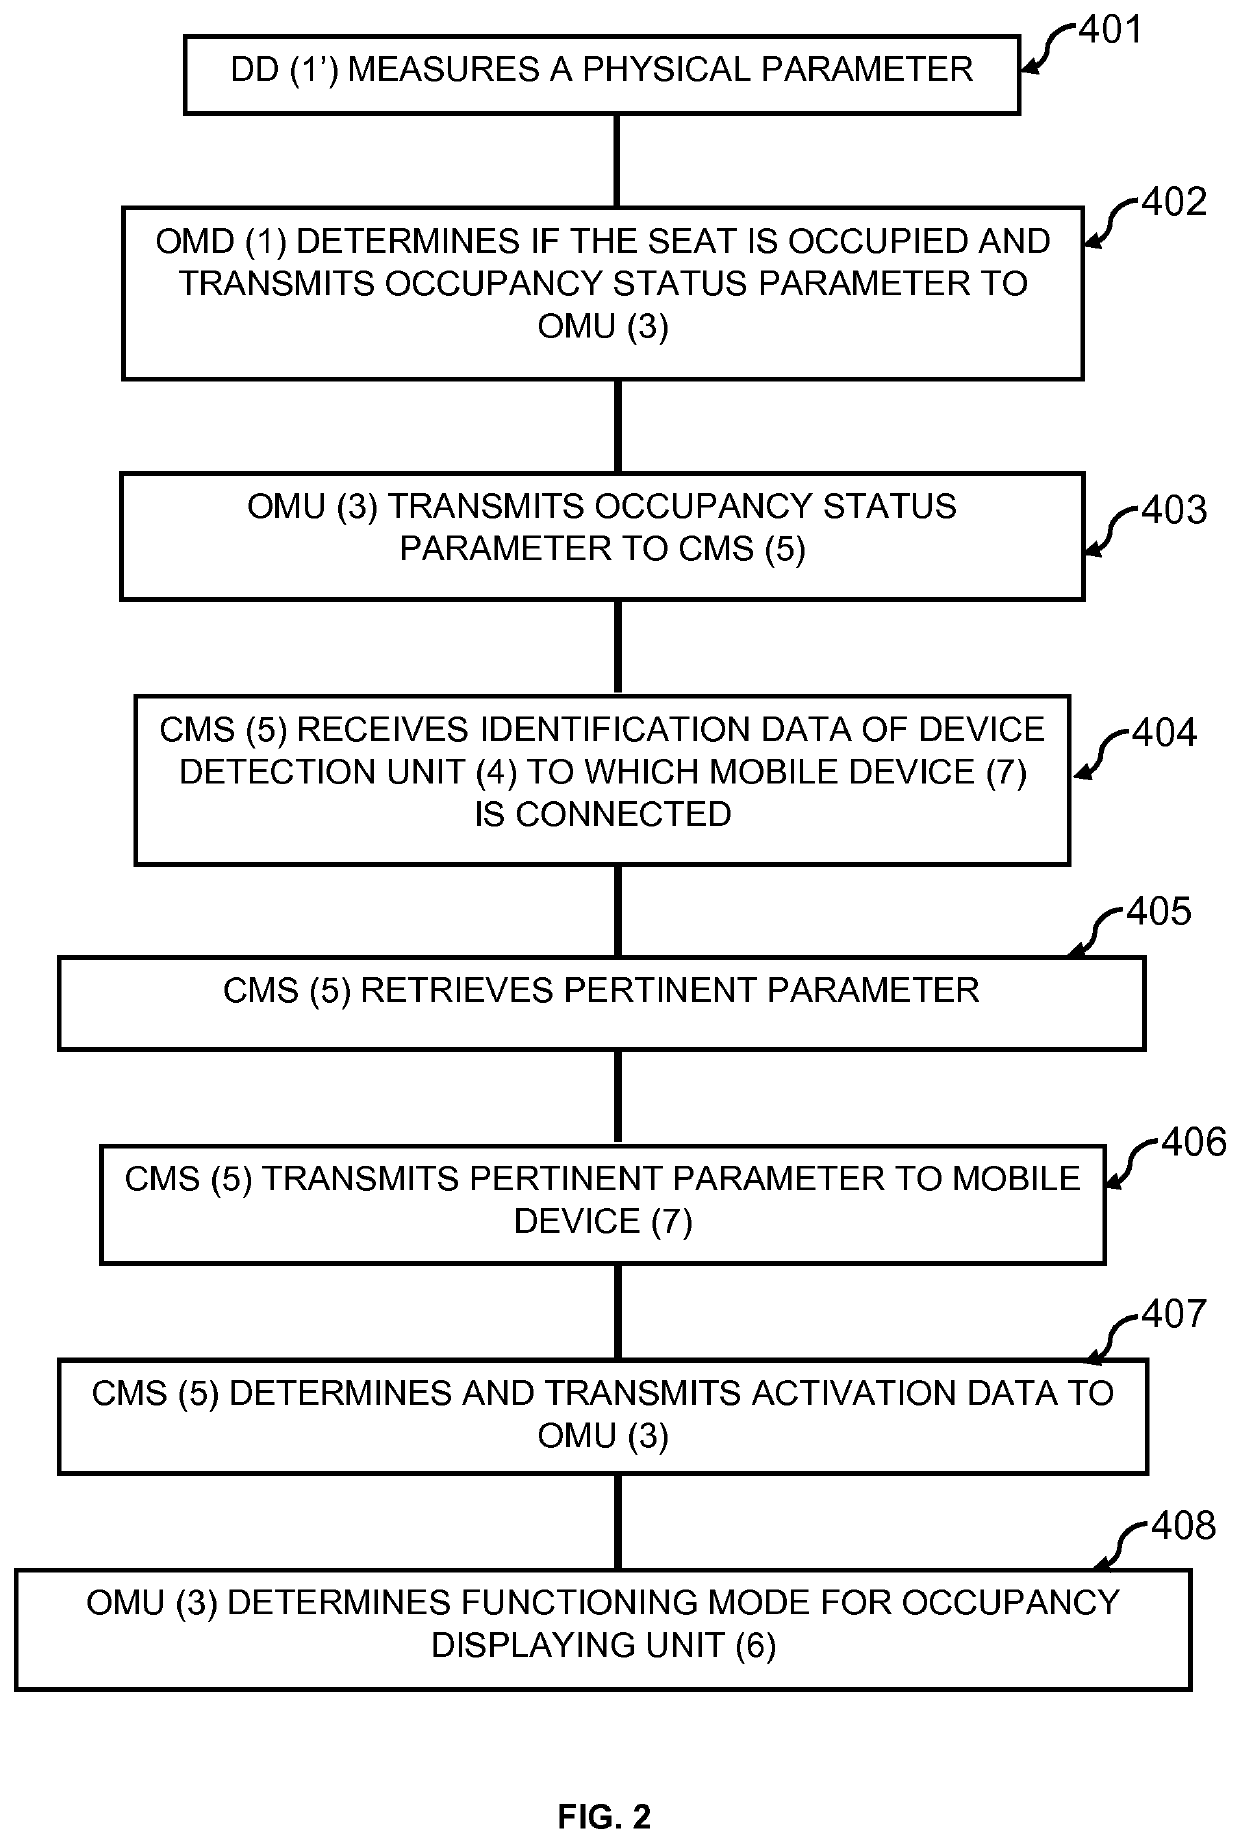 Method and system for monitoring occupancy of a seat arranged in a transportation vehicle